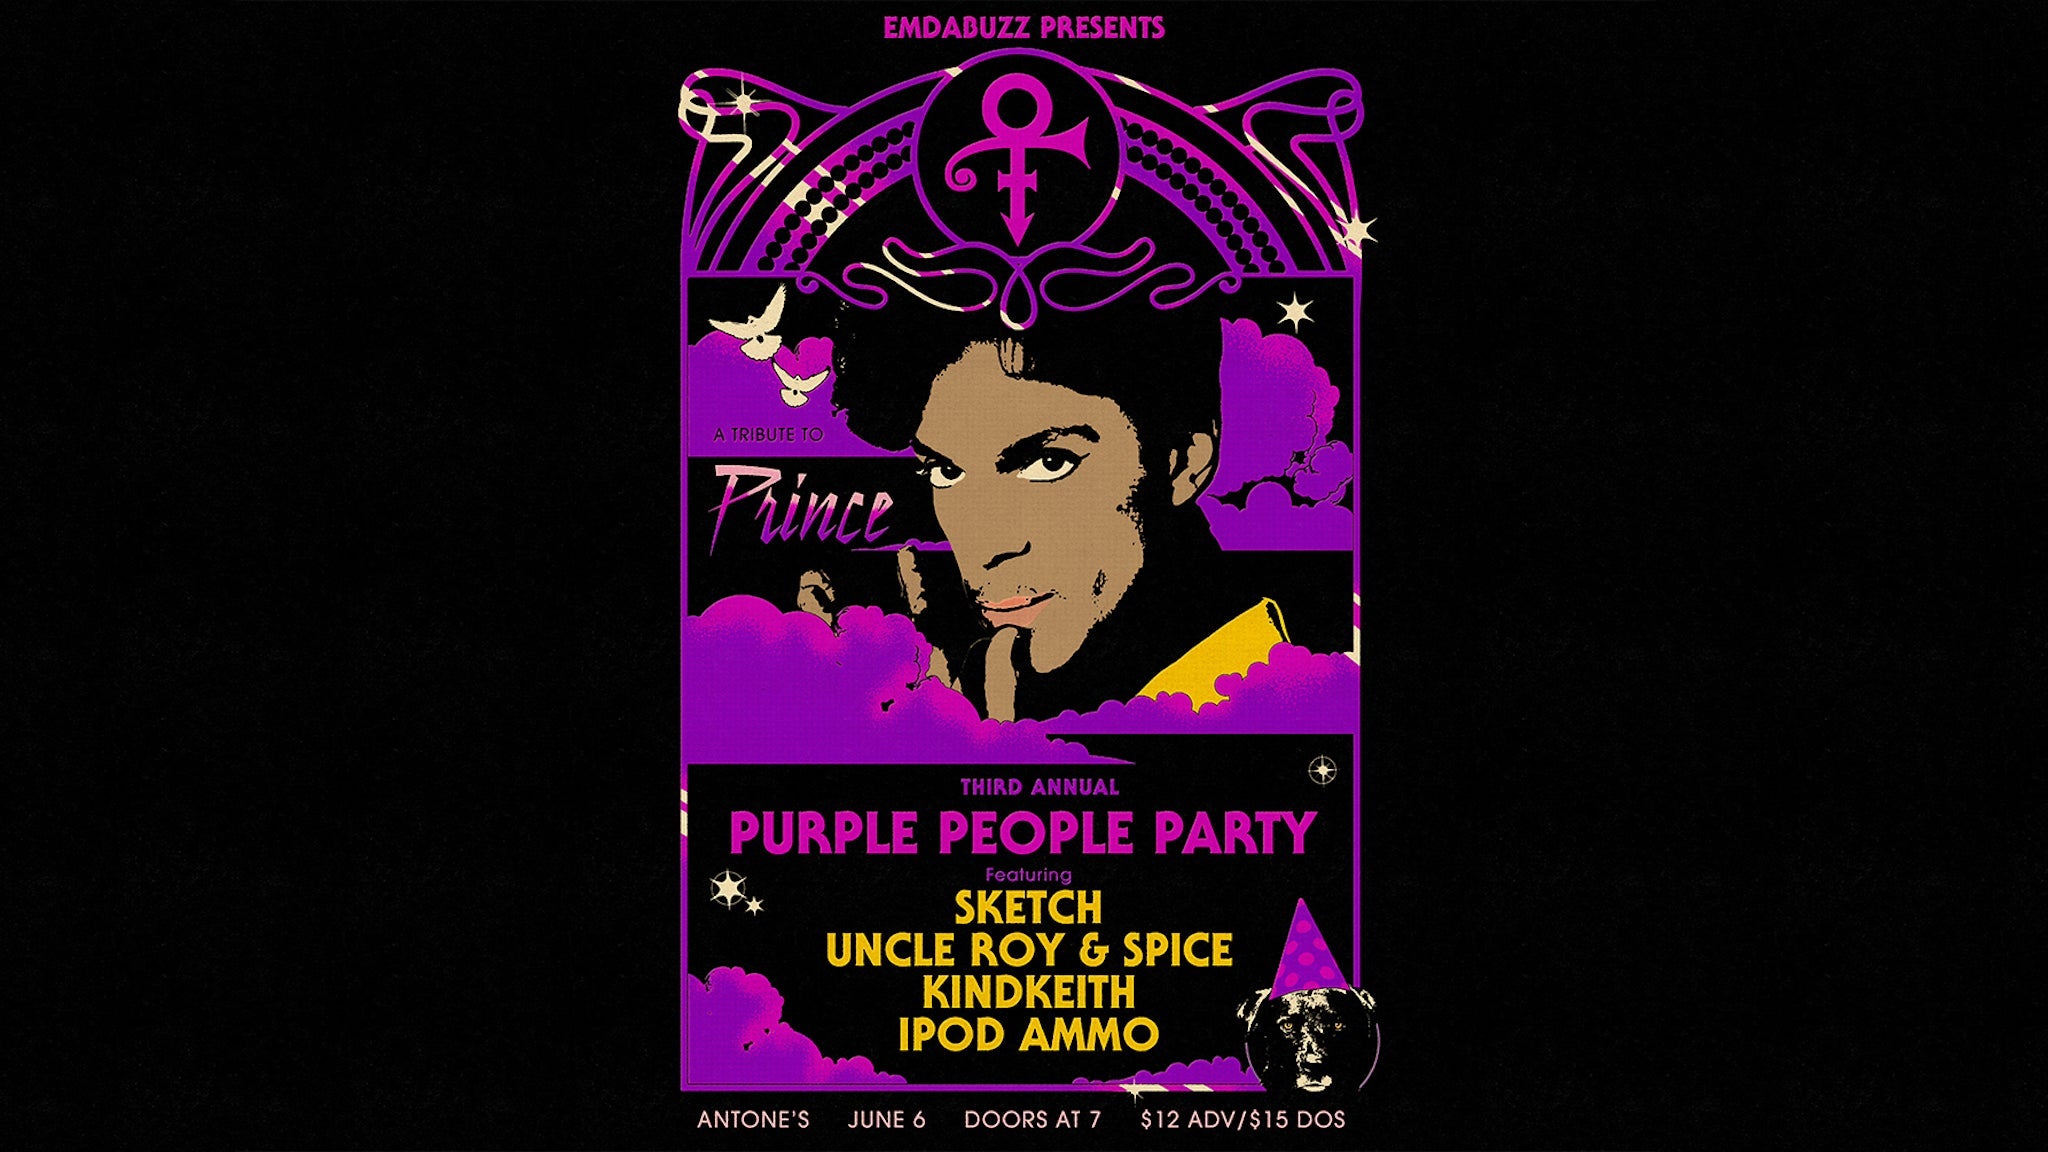 Purple People Party: A Tribute to Prince